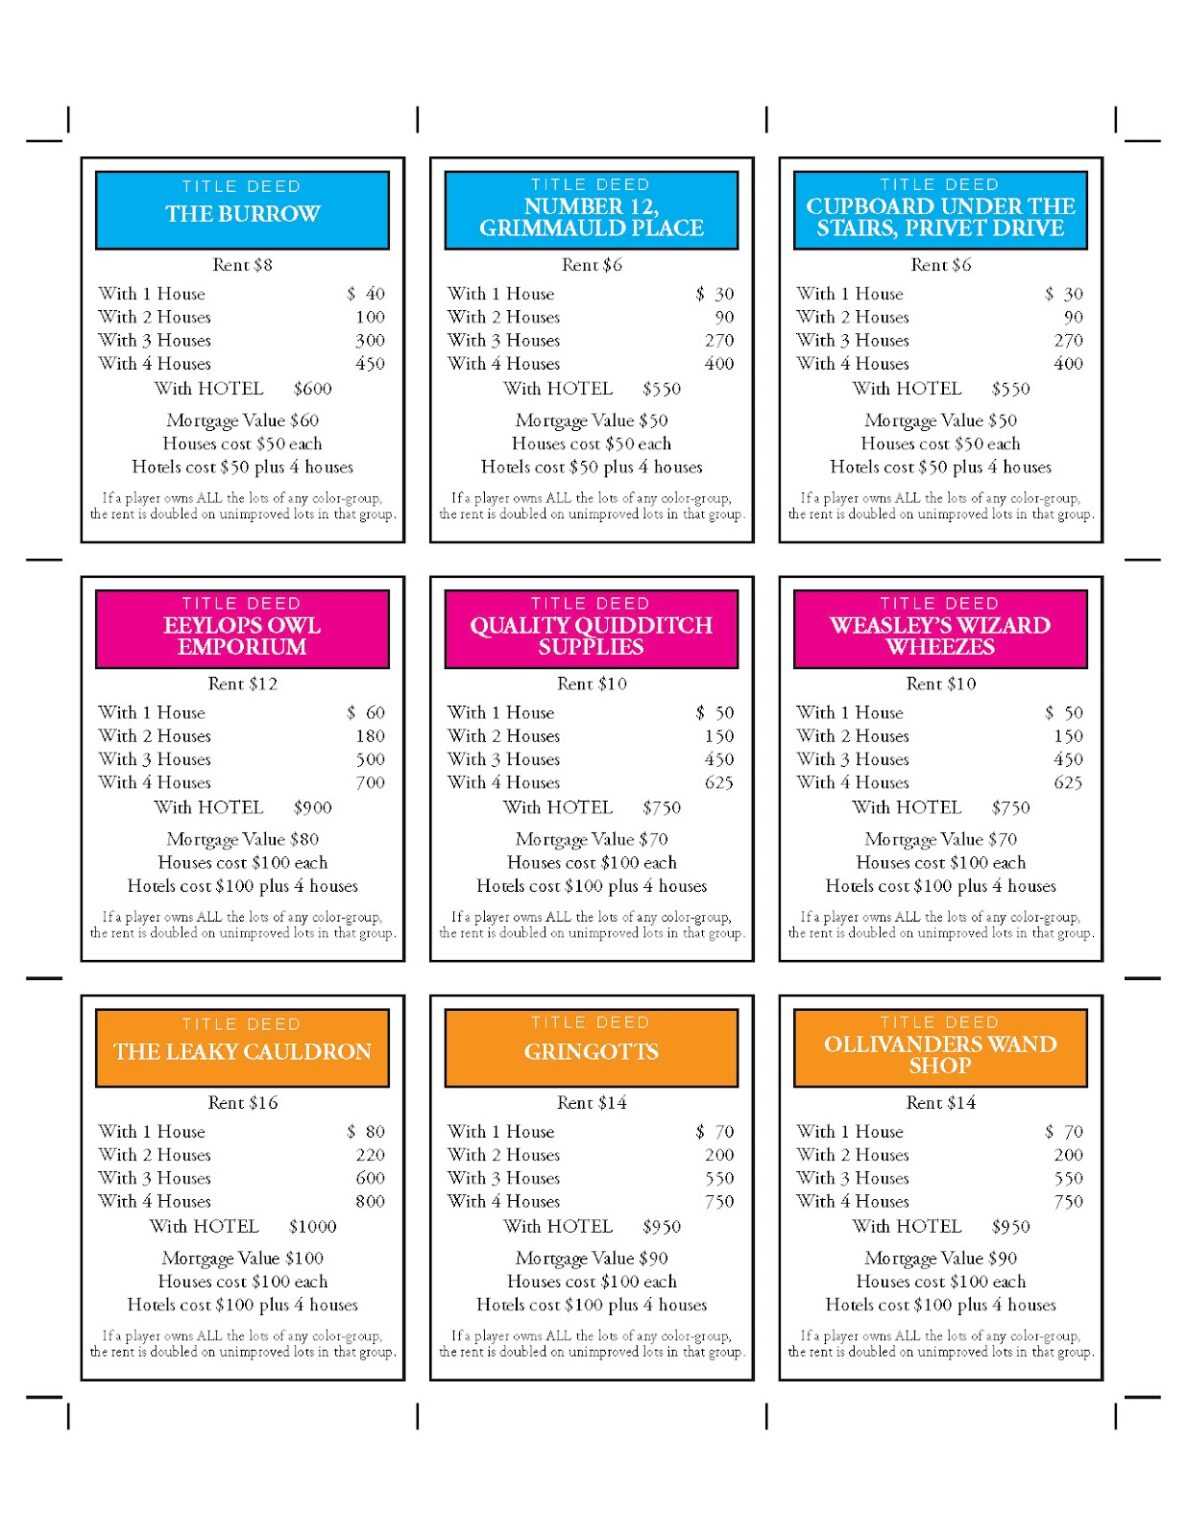 monopoly chance cards list